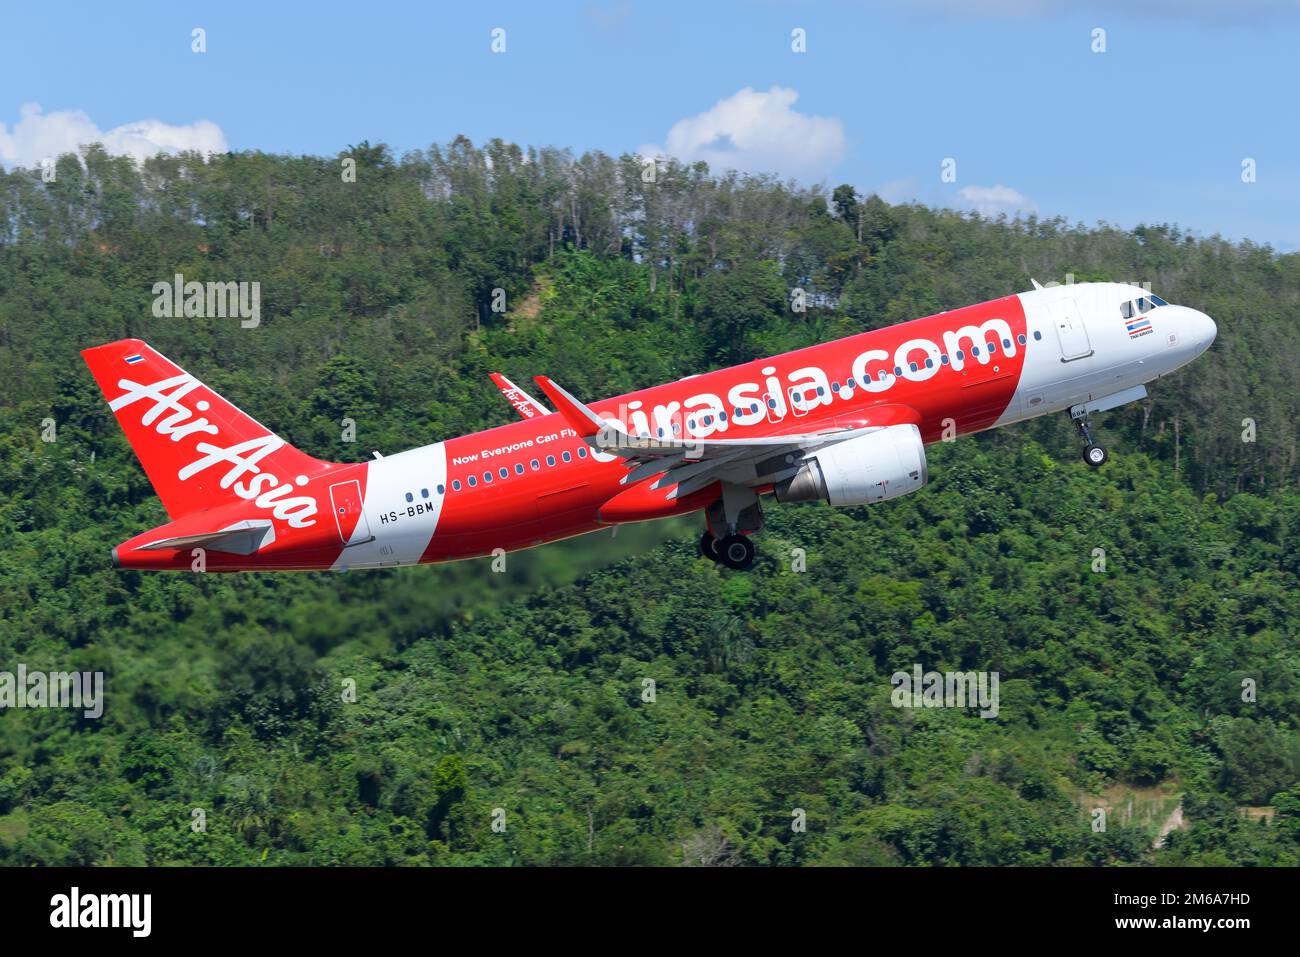 AirAsia Airbus A320 aircraft taking off. Airplane of airline Thai AirAsia departing HKT airport Aircraft A320ceo of Air Asia Thailand. Stock Photo